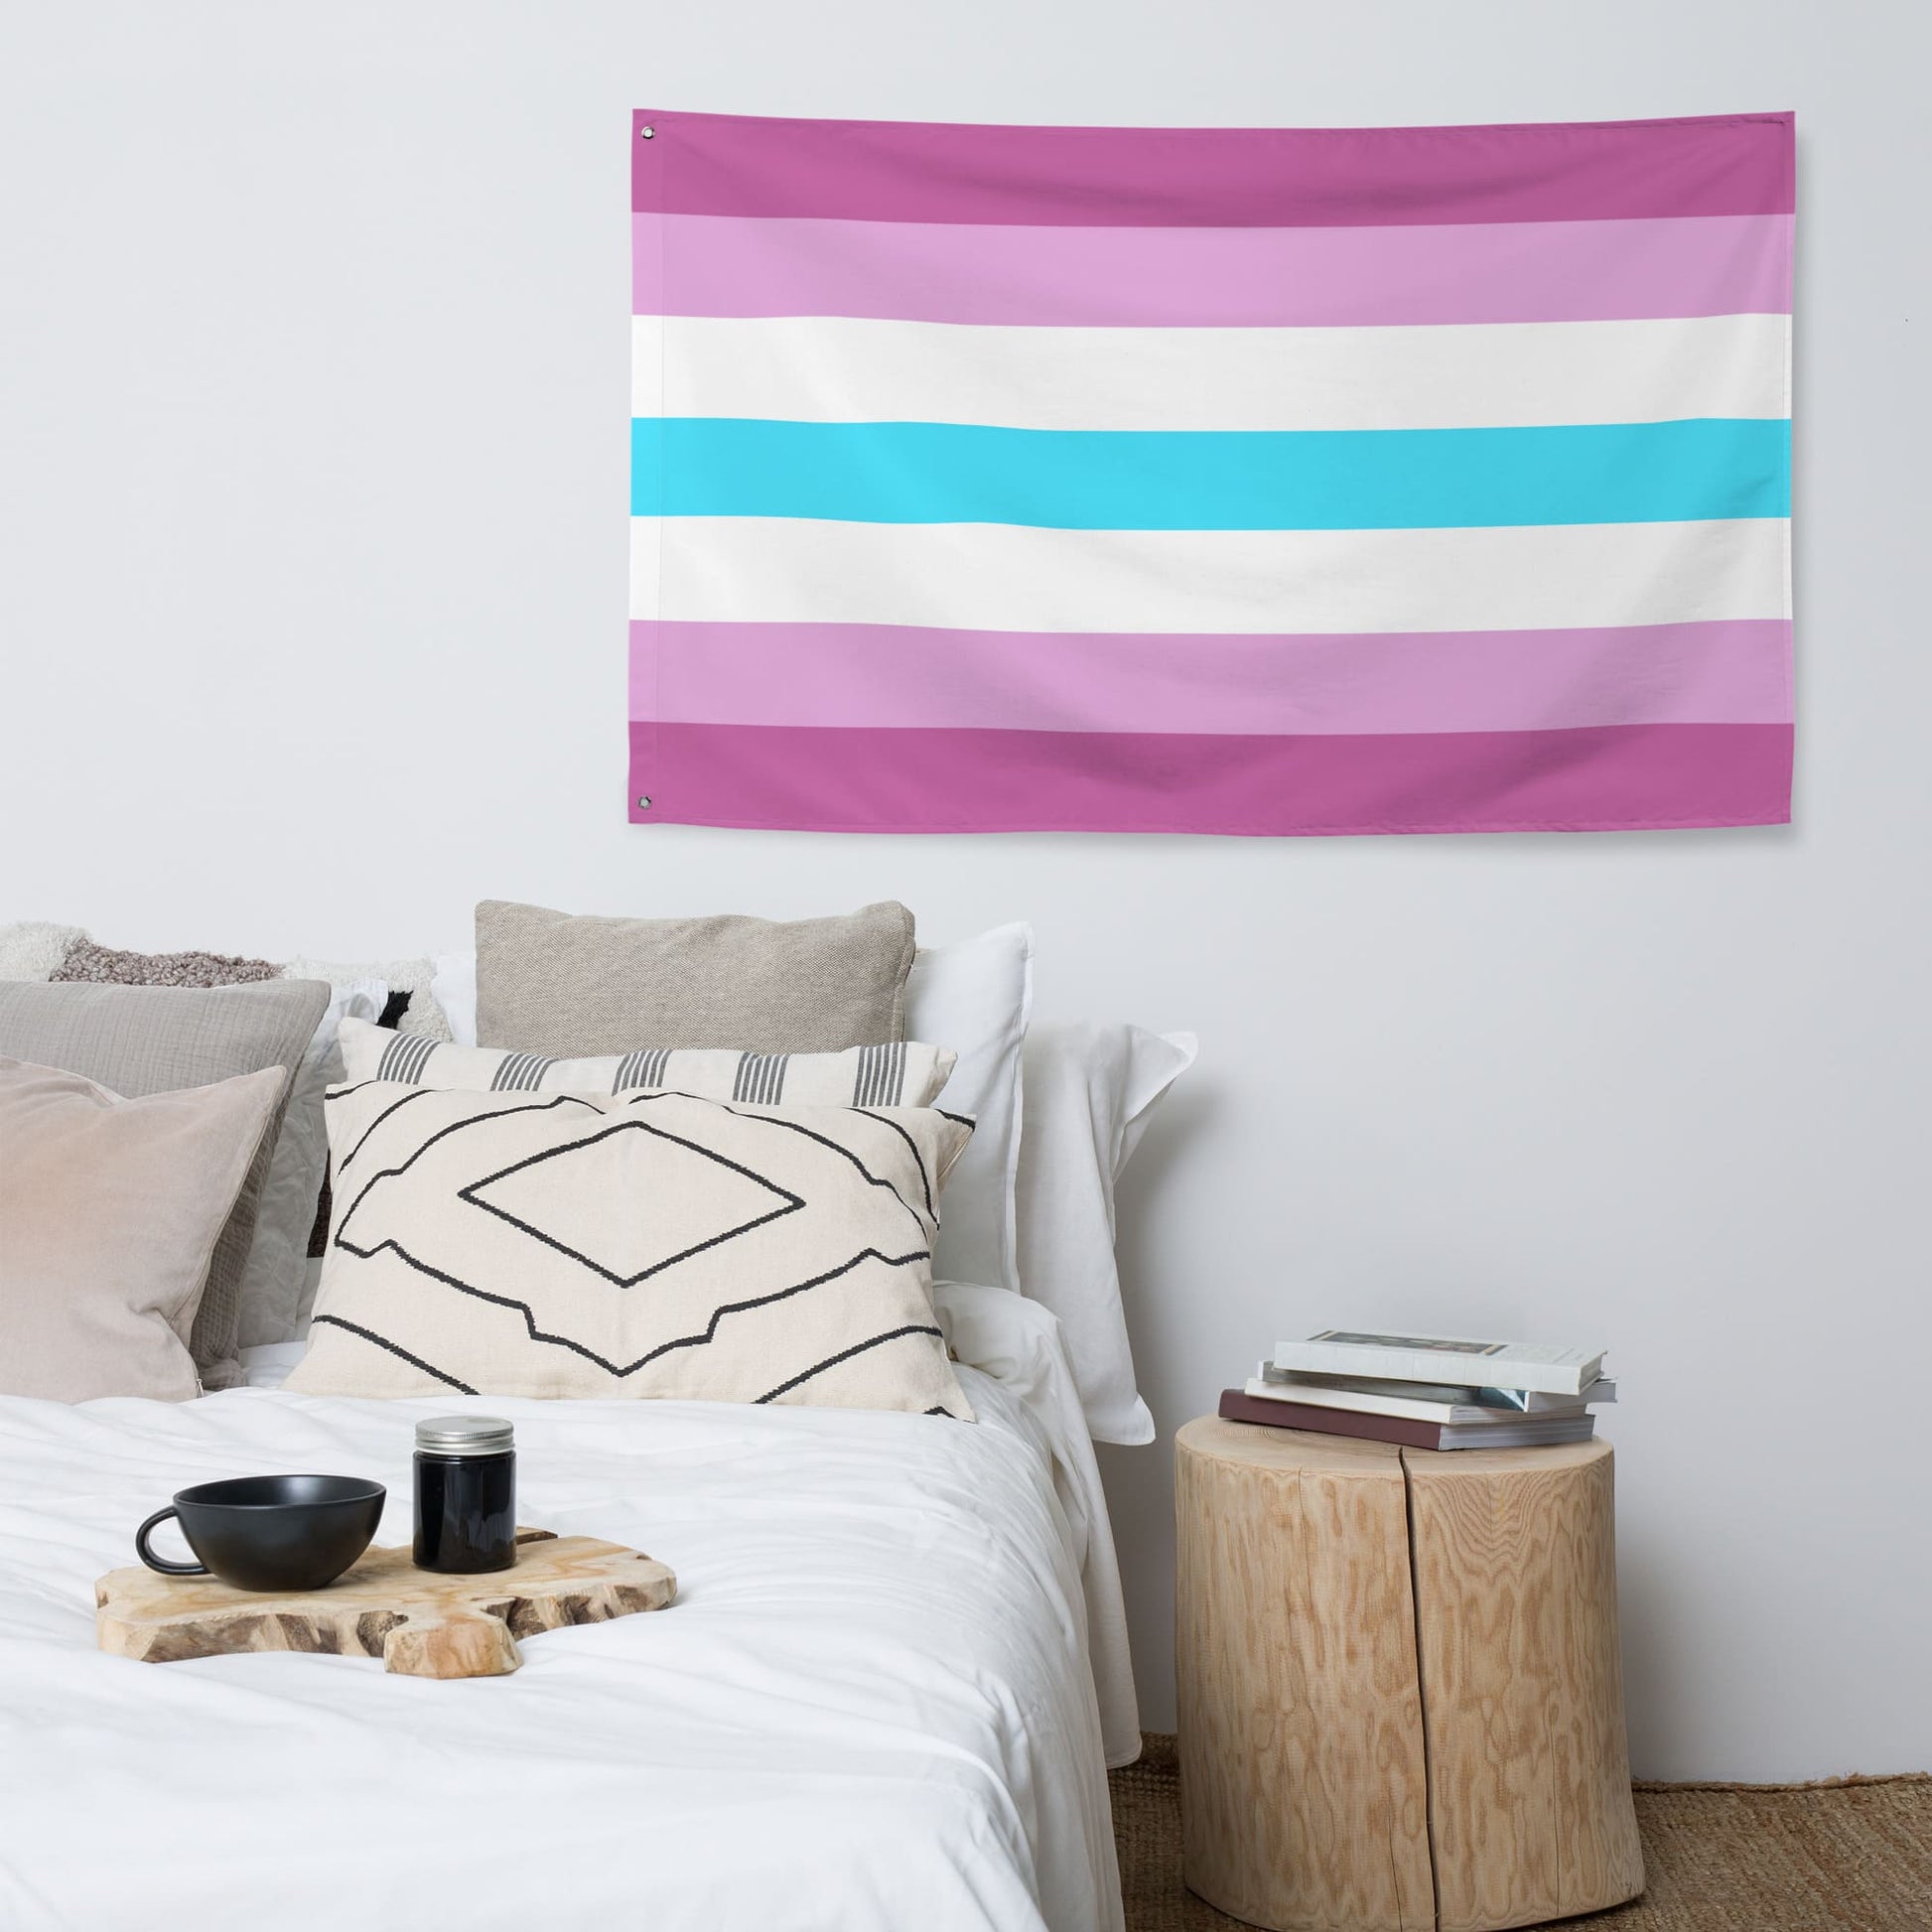 Femboy flag wall tapestry, in use